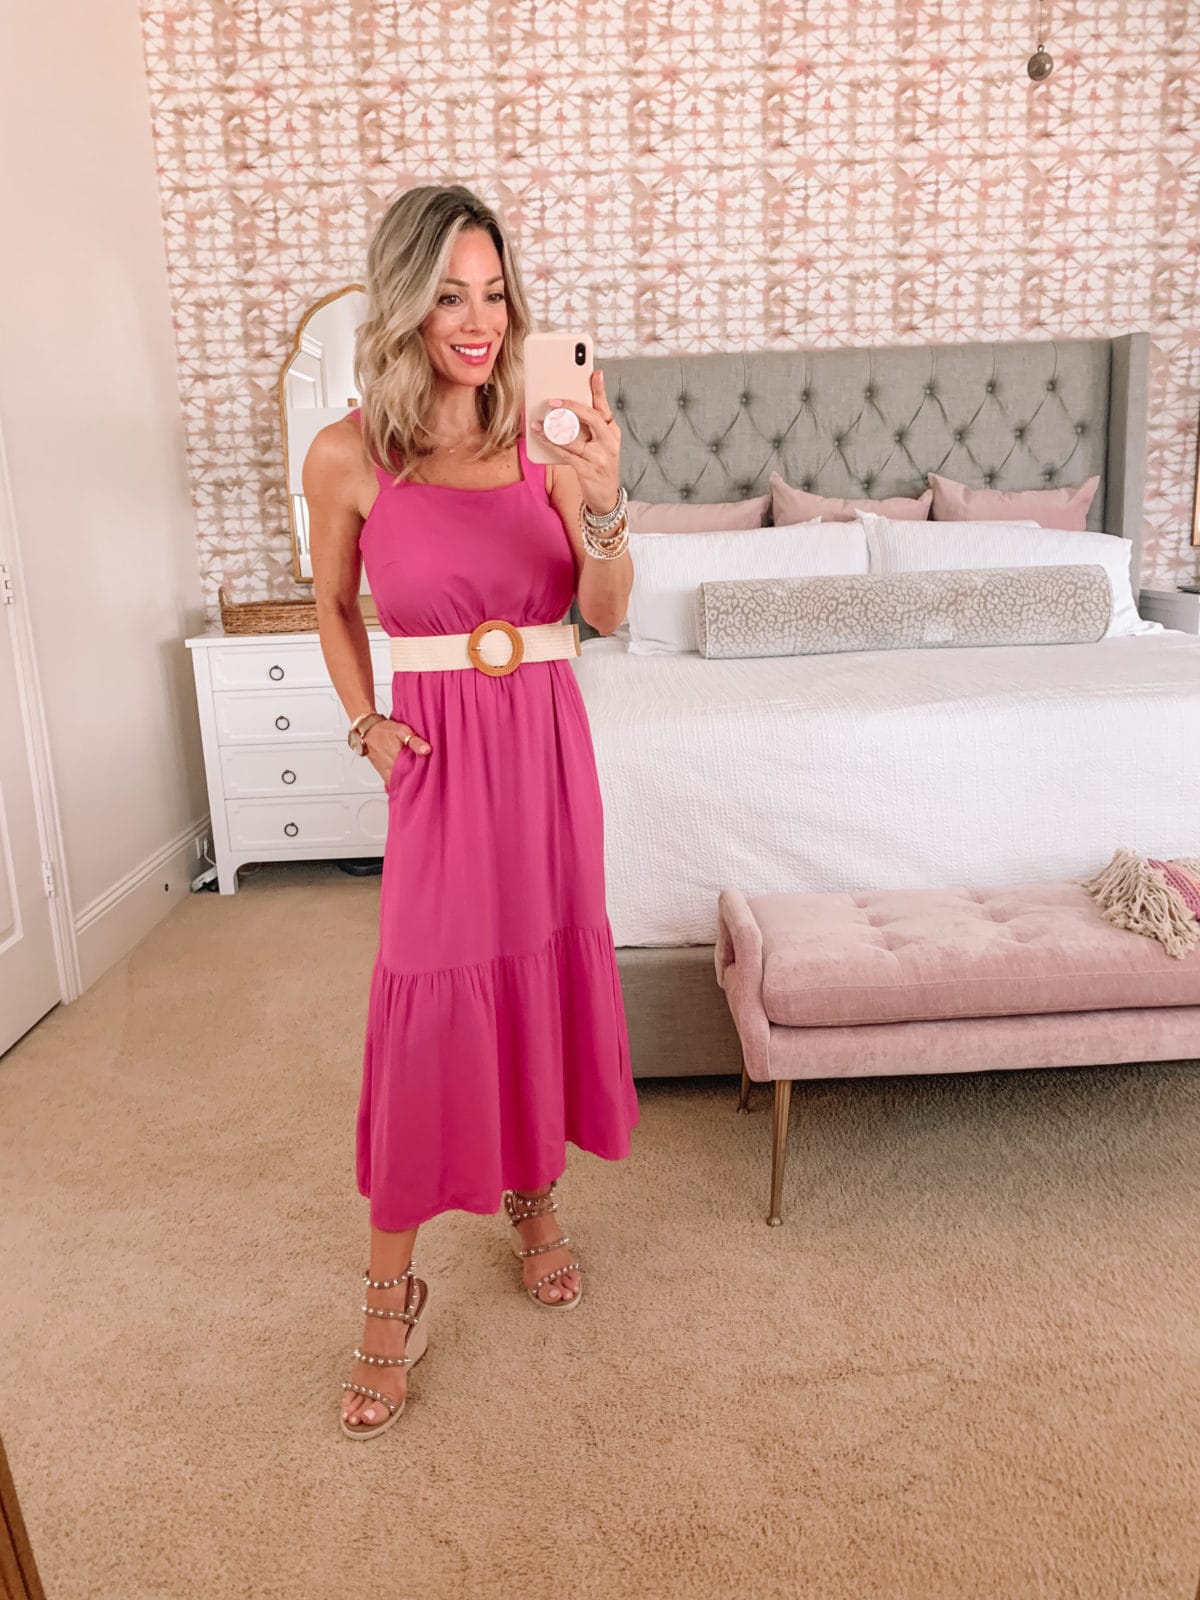 Amazon Fashion Faves, Pink maxi Dress, Studded Wedges and Woven Belt 